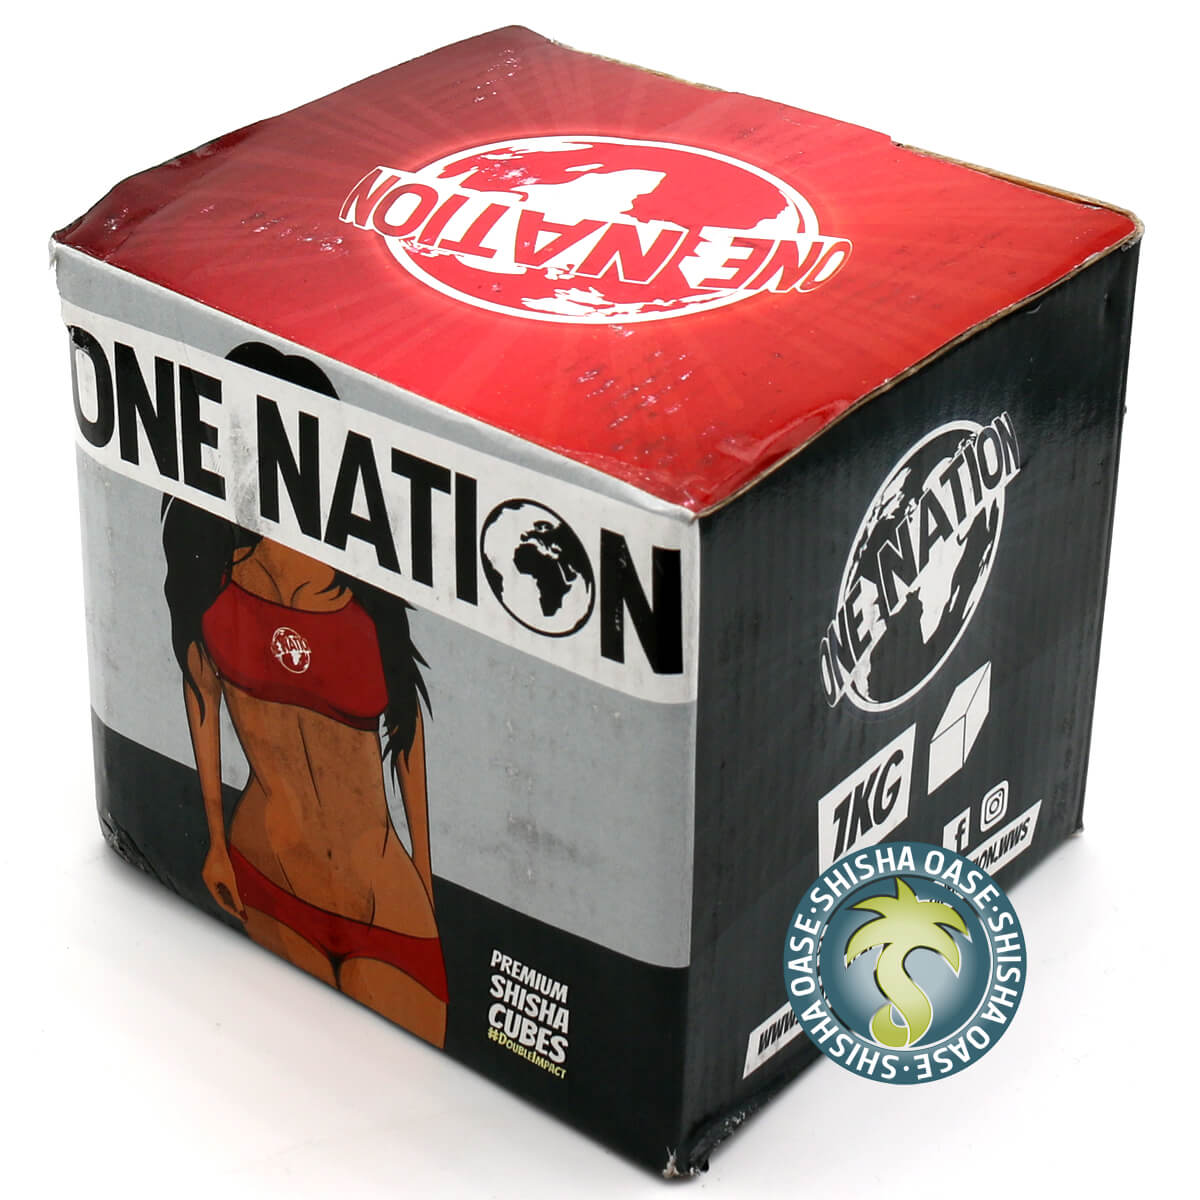 One Nation #Double Impact - 1kg